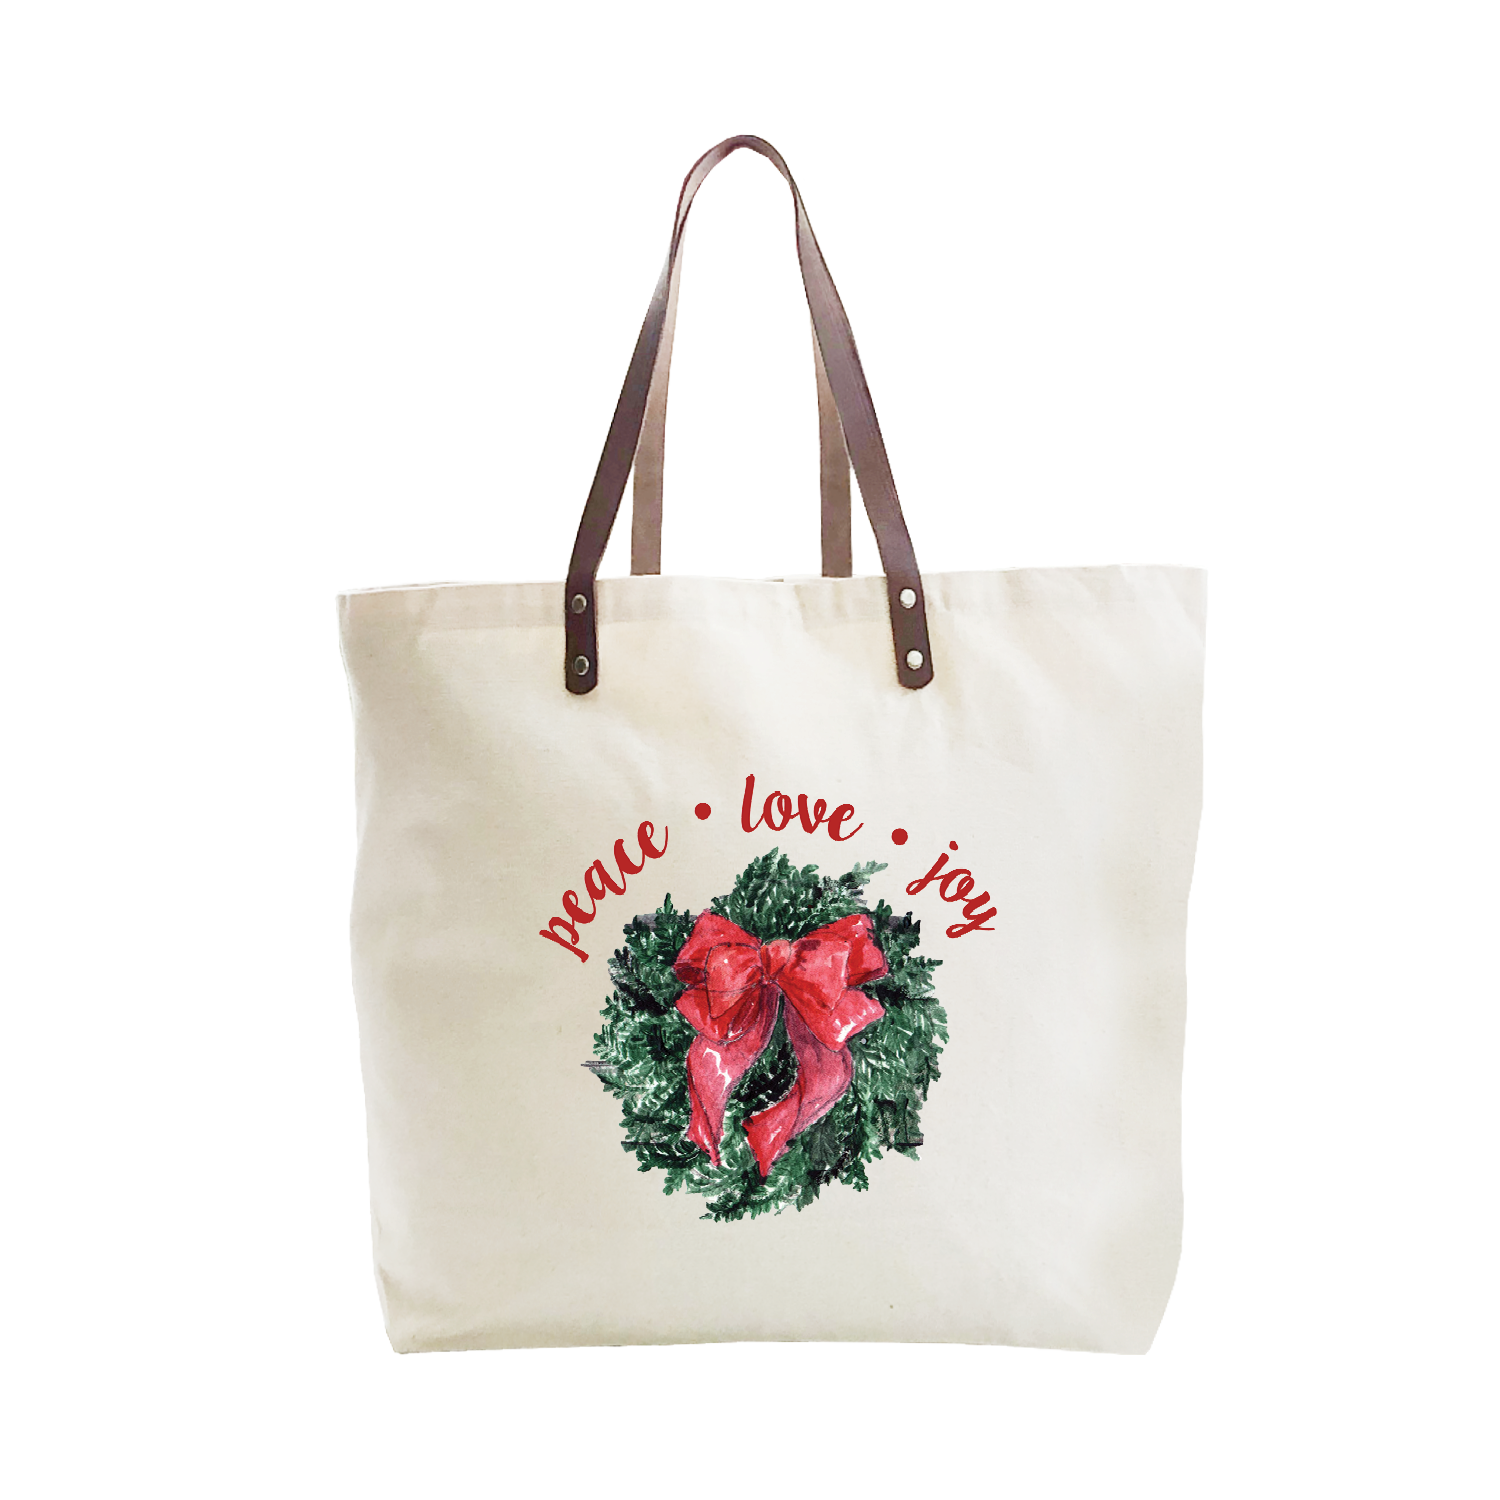 wreath with bow peace love joy italics large tote